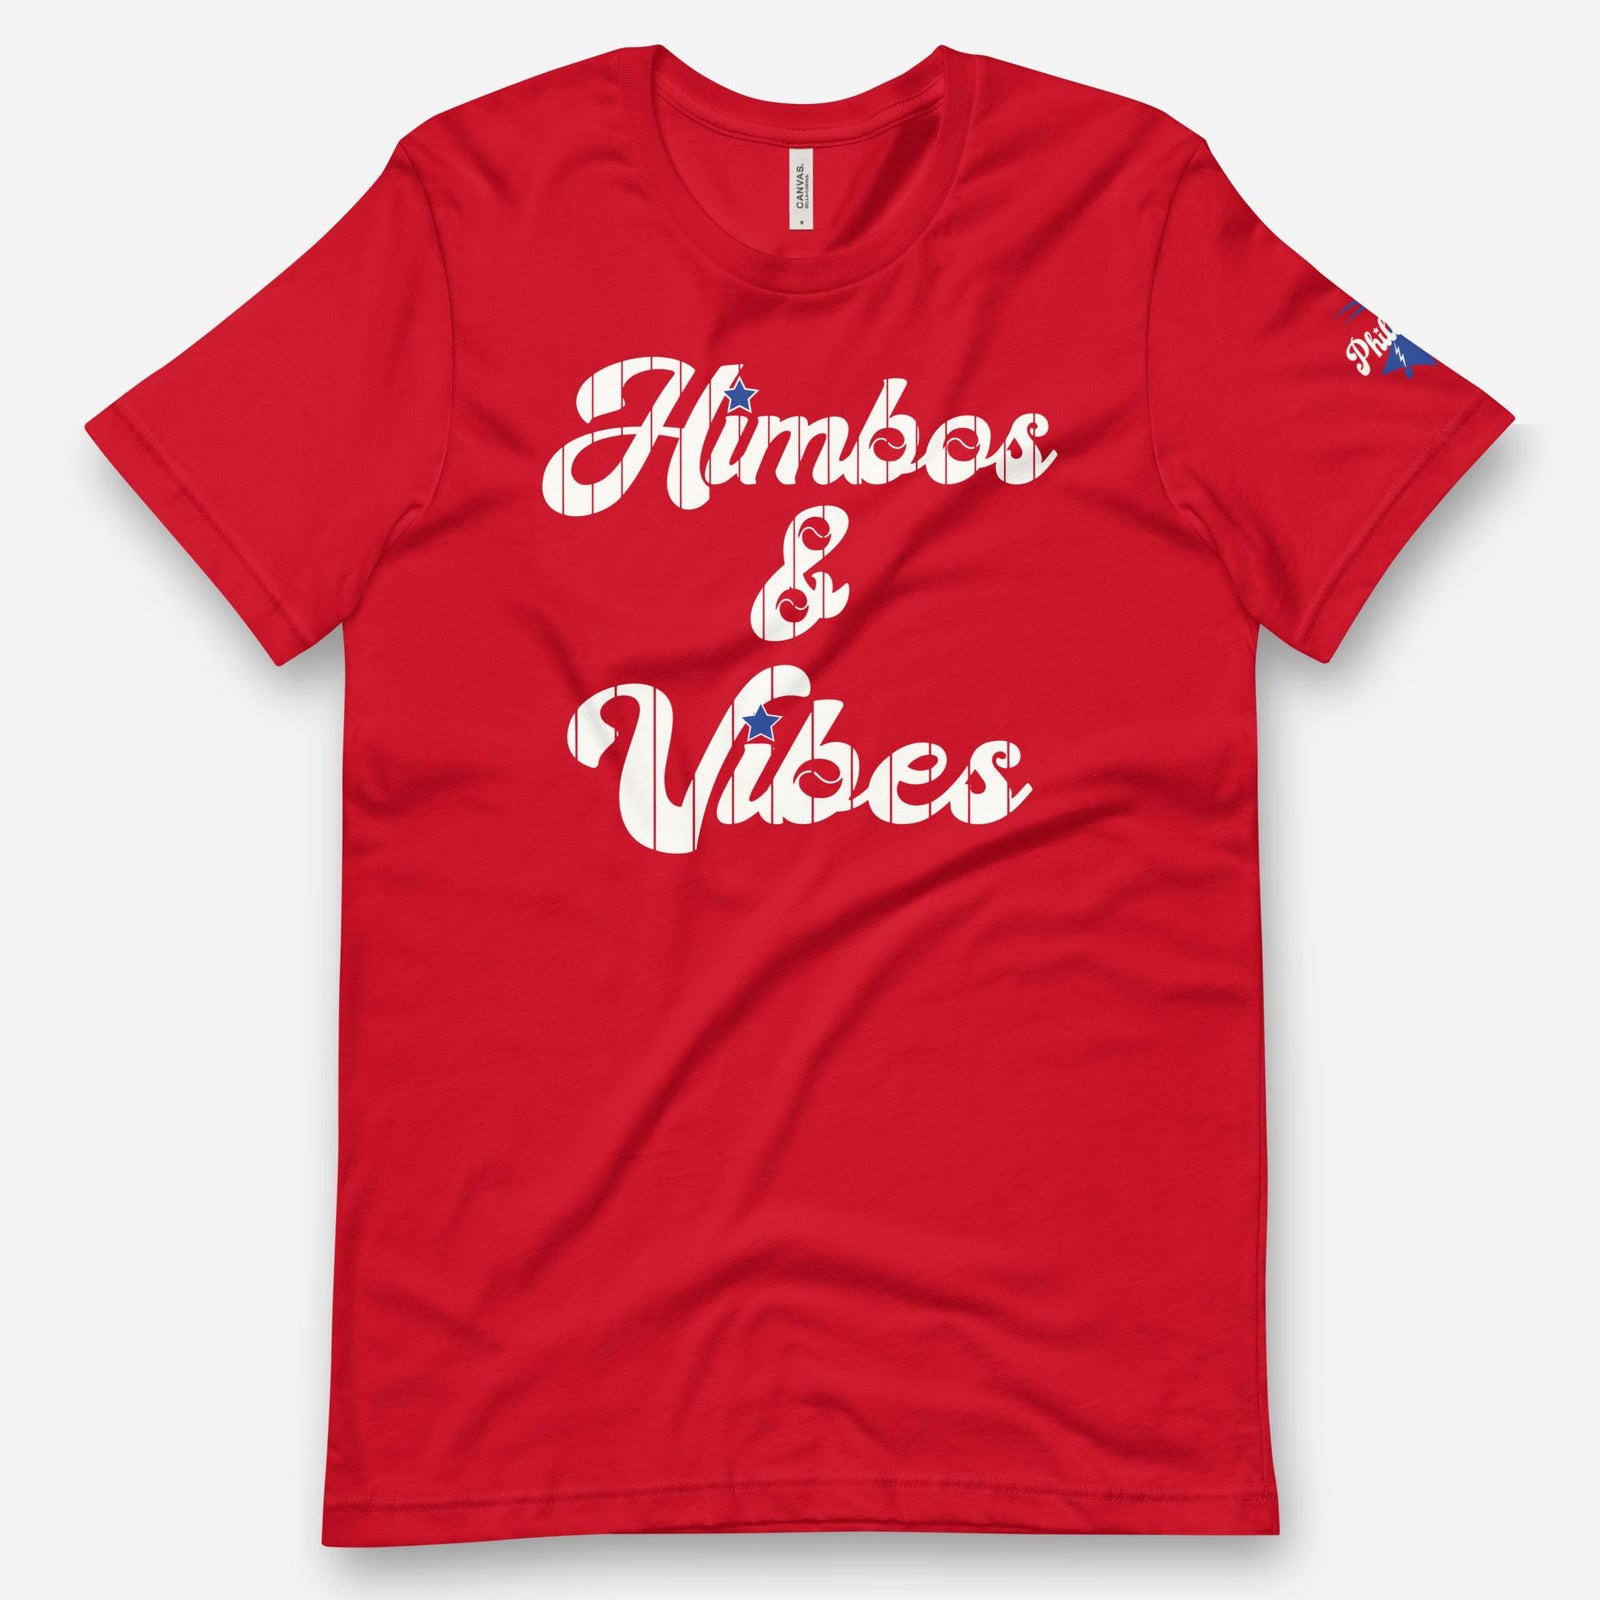 "Himbos & Vibes" Tee